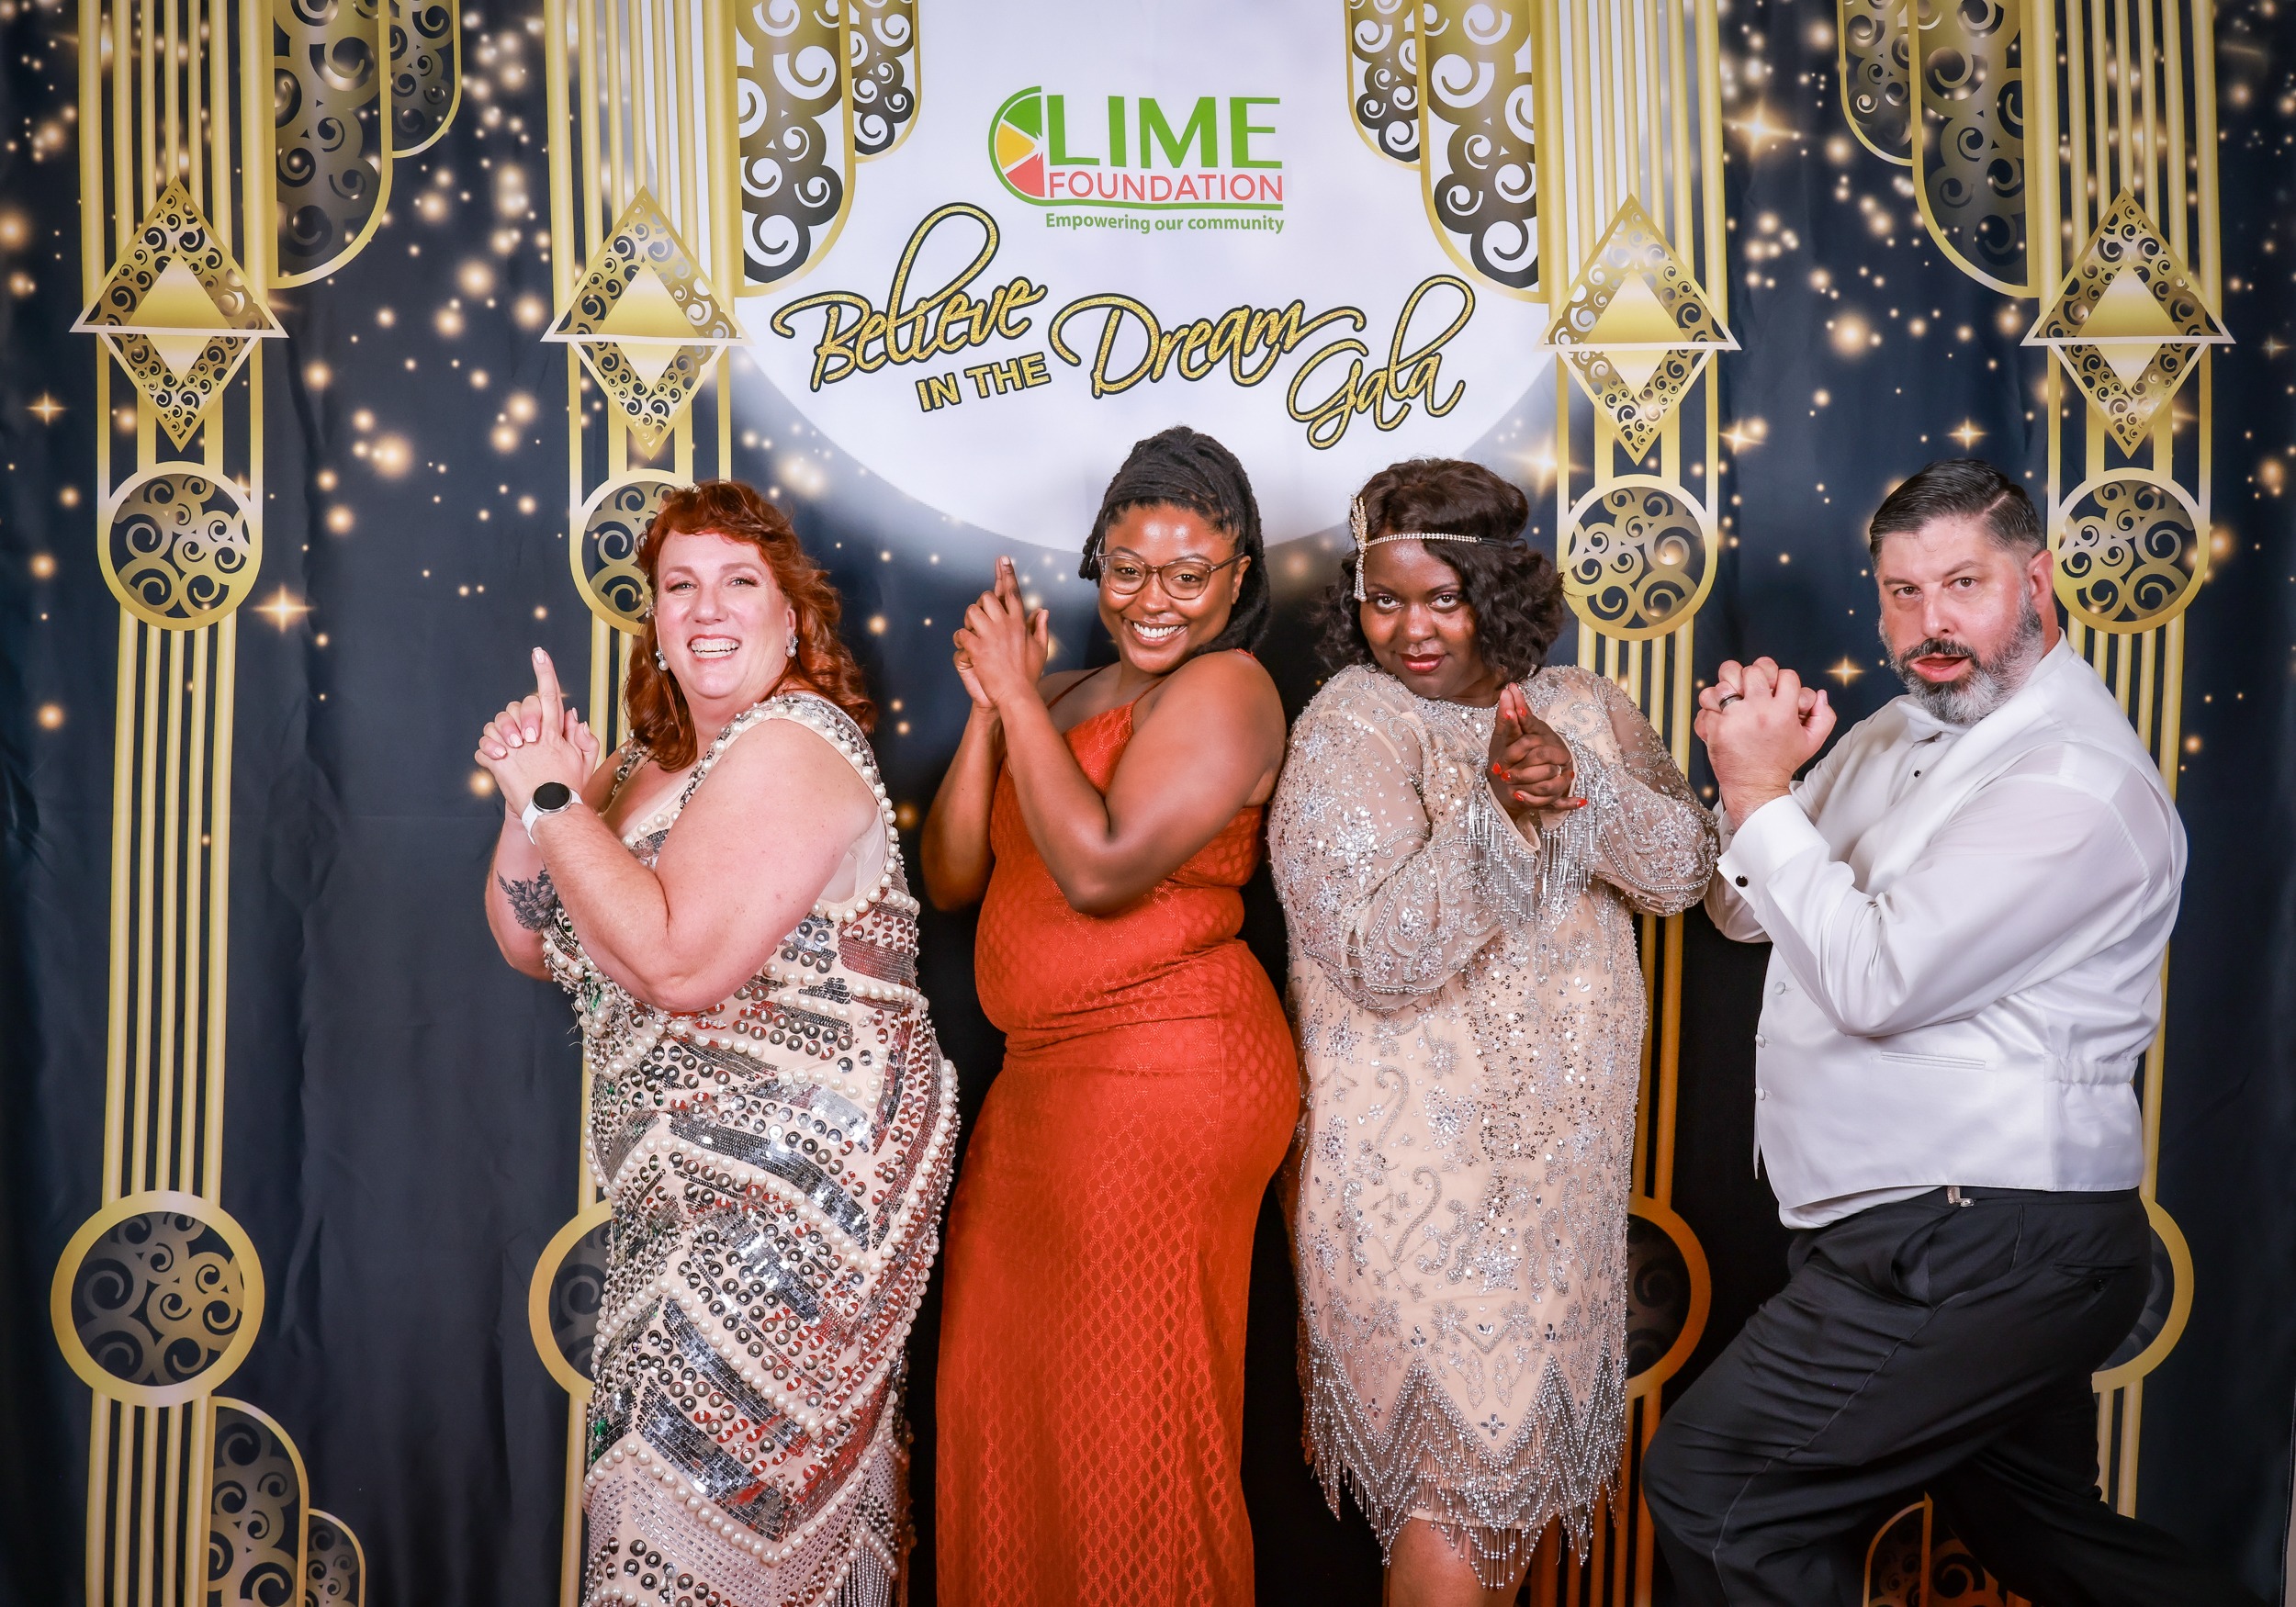 A group of people posing for a photo at a party hosted by The LIME Foundation.